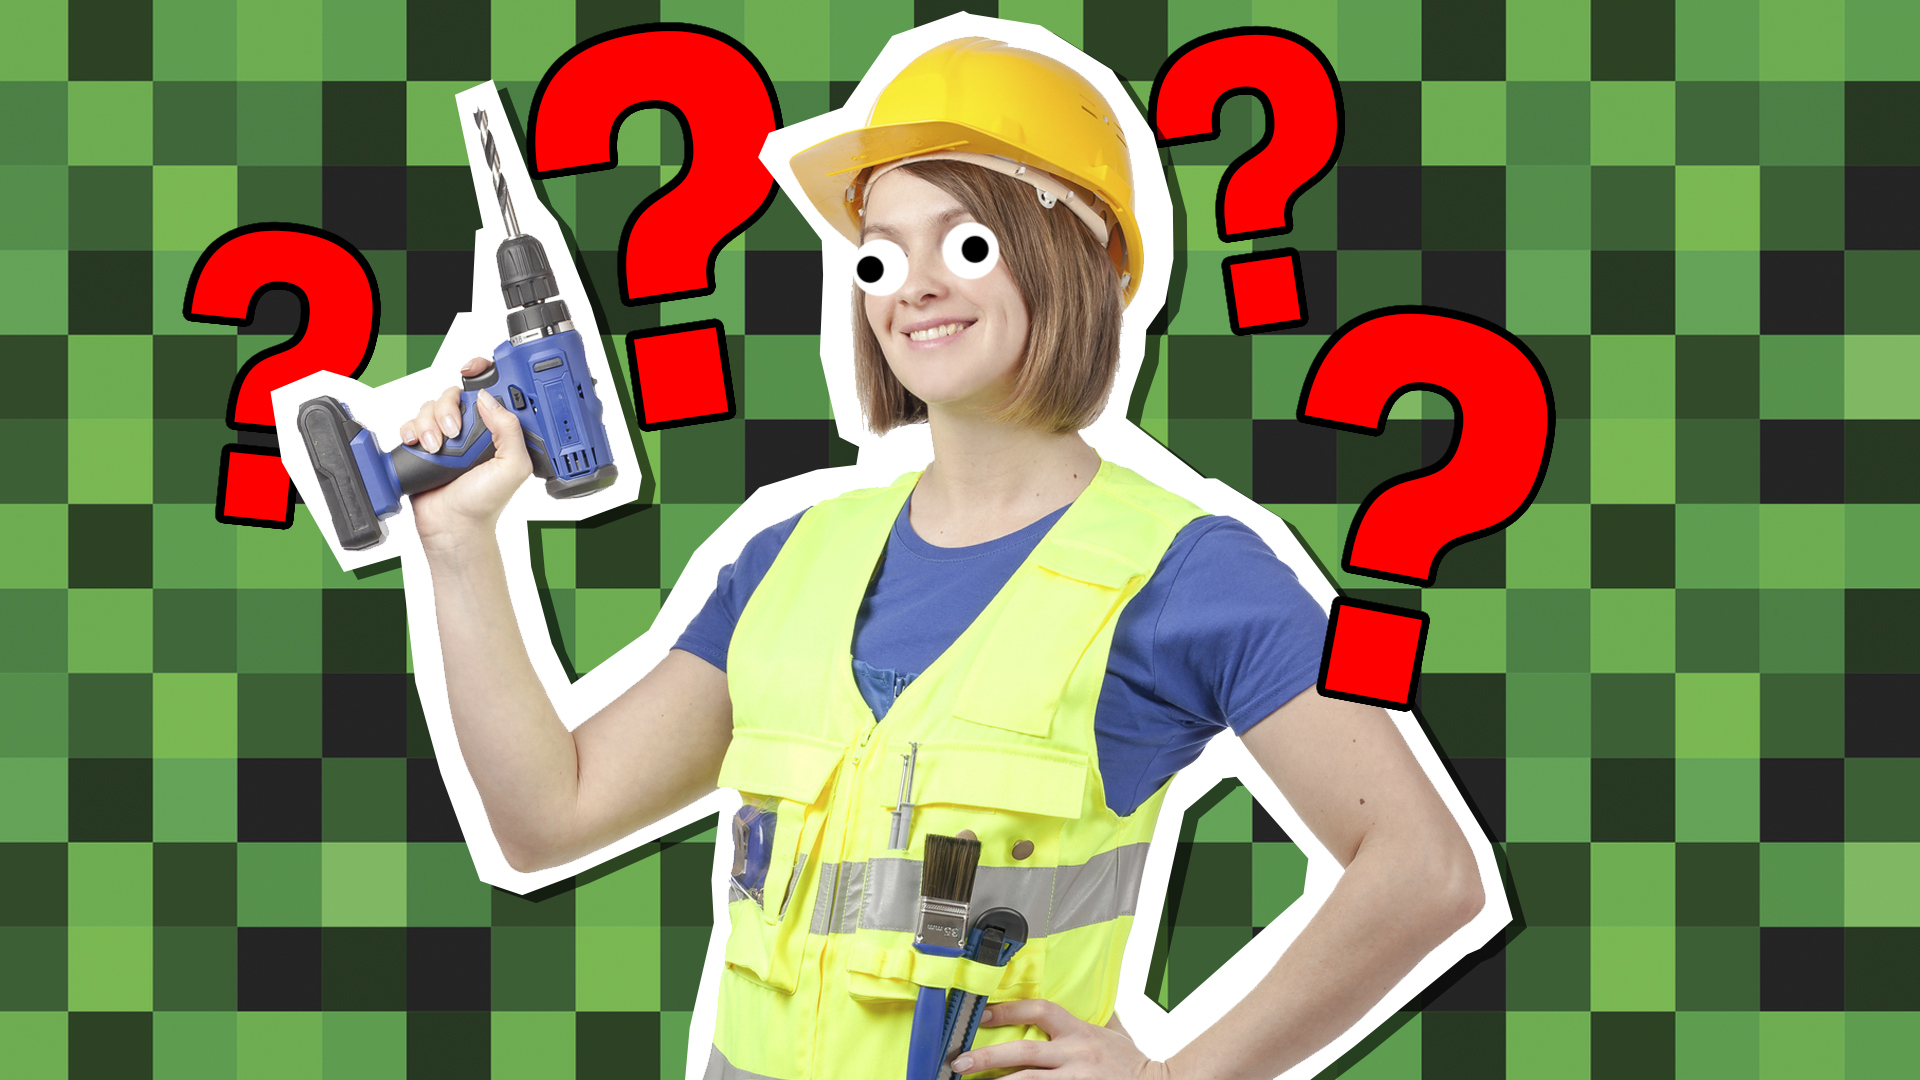 A builder against a Minecraft-style background